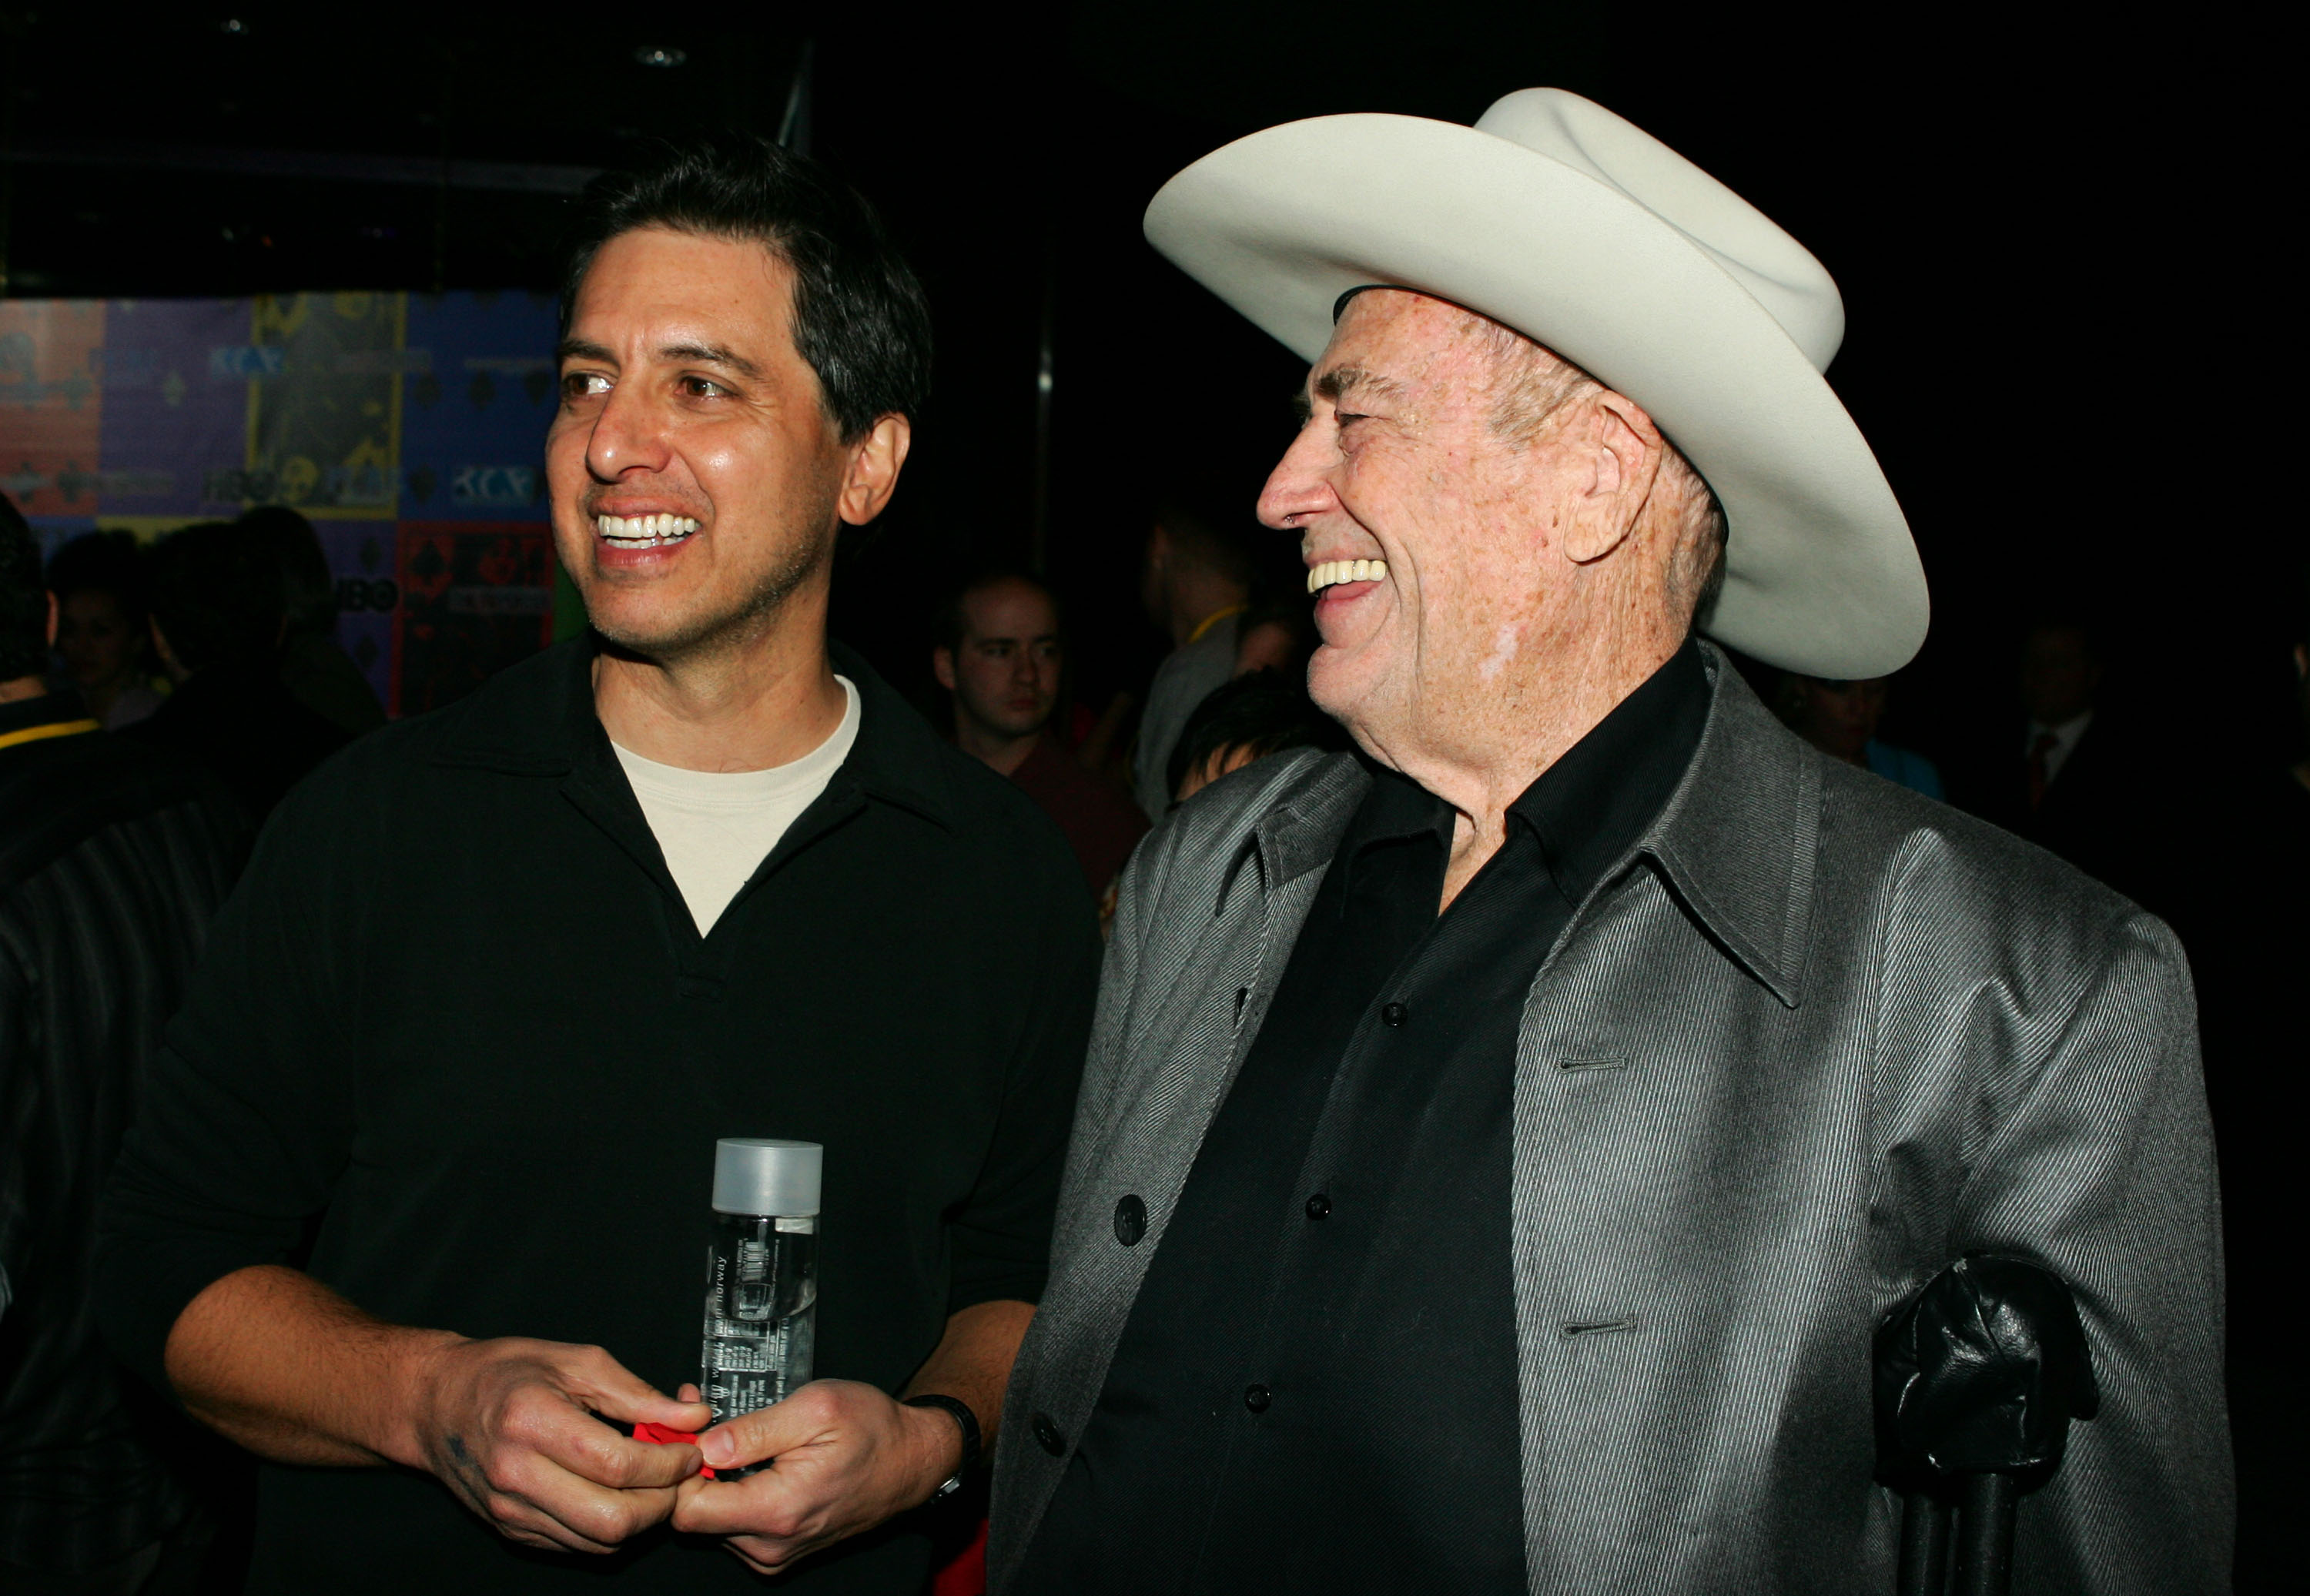 Ray Romano and Doyle Brunson during the 2005 Comedy Festival - Celebrity Poker Tournament at PURE Nightclub at Caesars Palace in Las Vegas. (Photo by Mathew Imaging/FilmMagic)